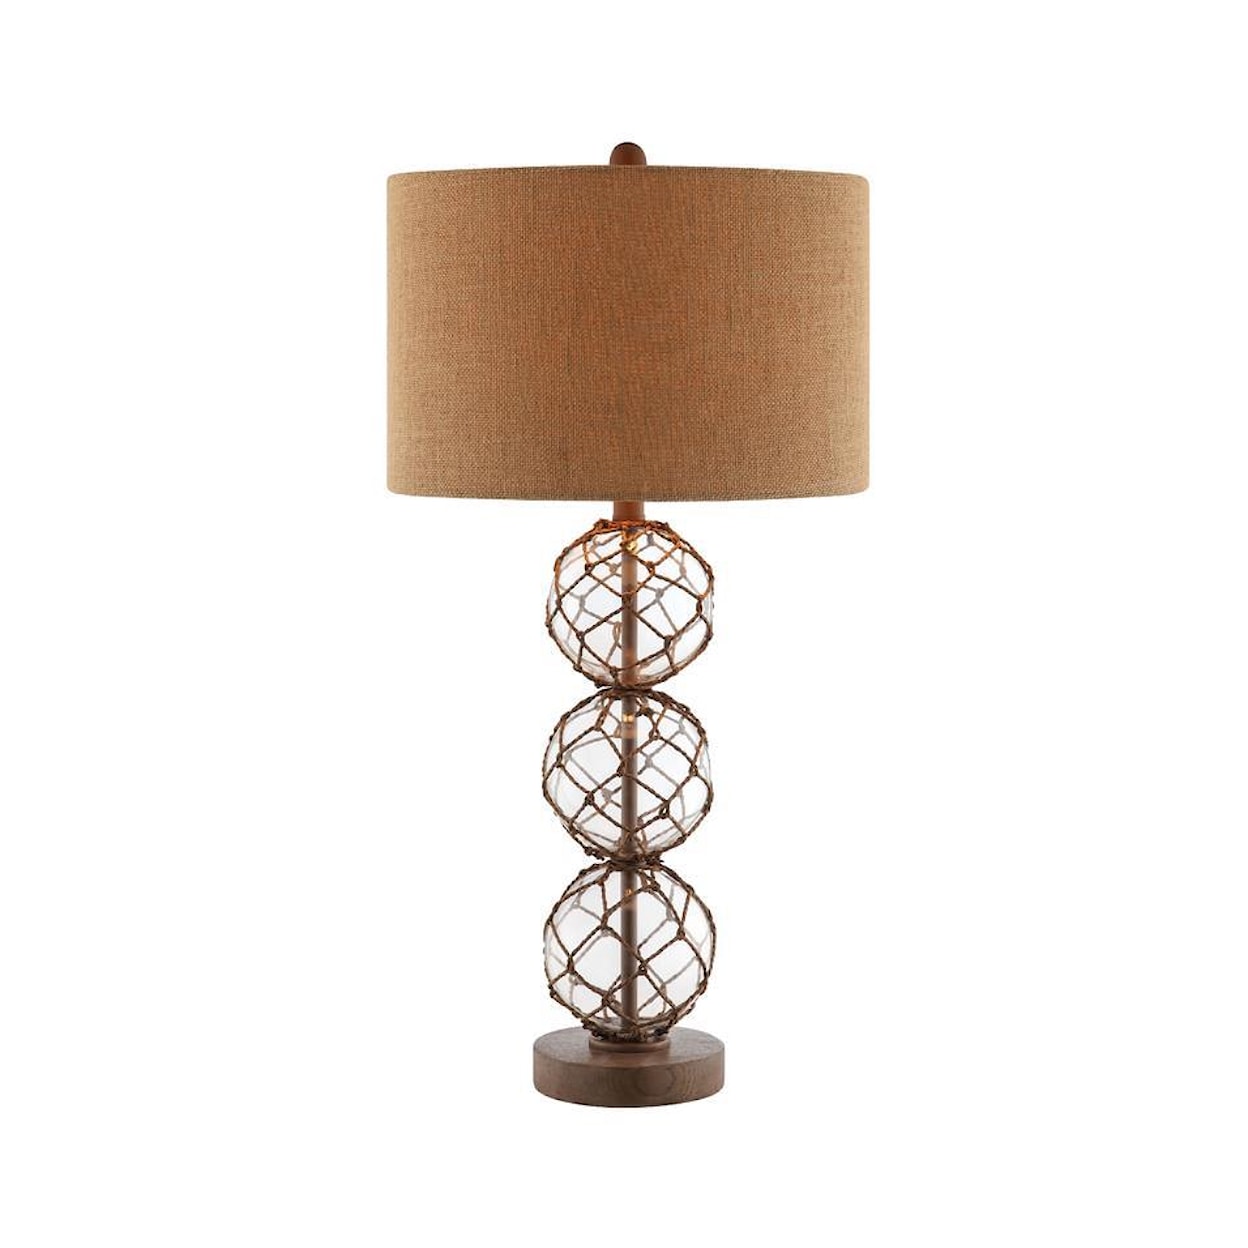 Stein World Lamps Accent Lamp